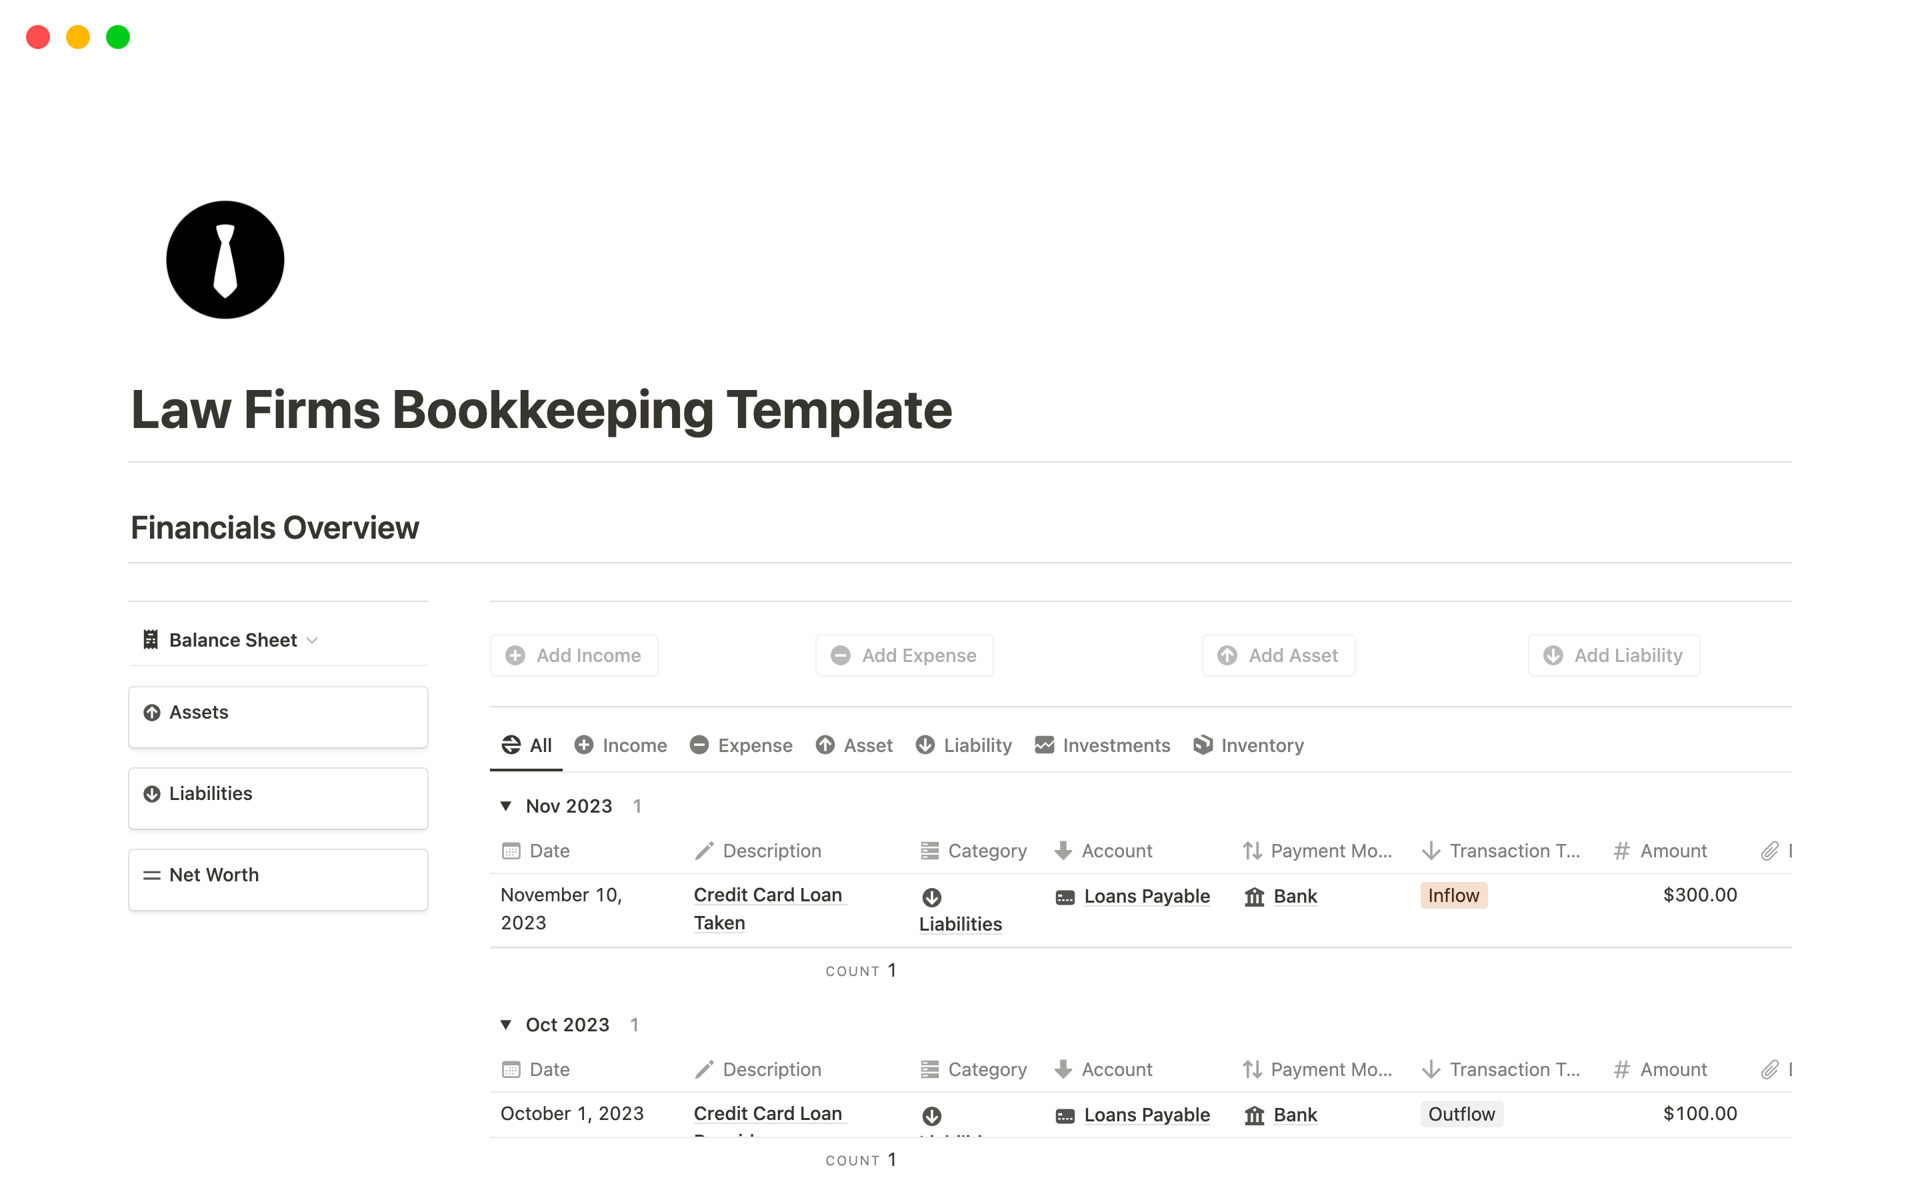 This bookkeeping template provides best solution for law firms to manage their business finances, produce income statement, balance sheet, cash flow statement and much more on a periodical basis. 